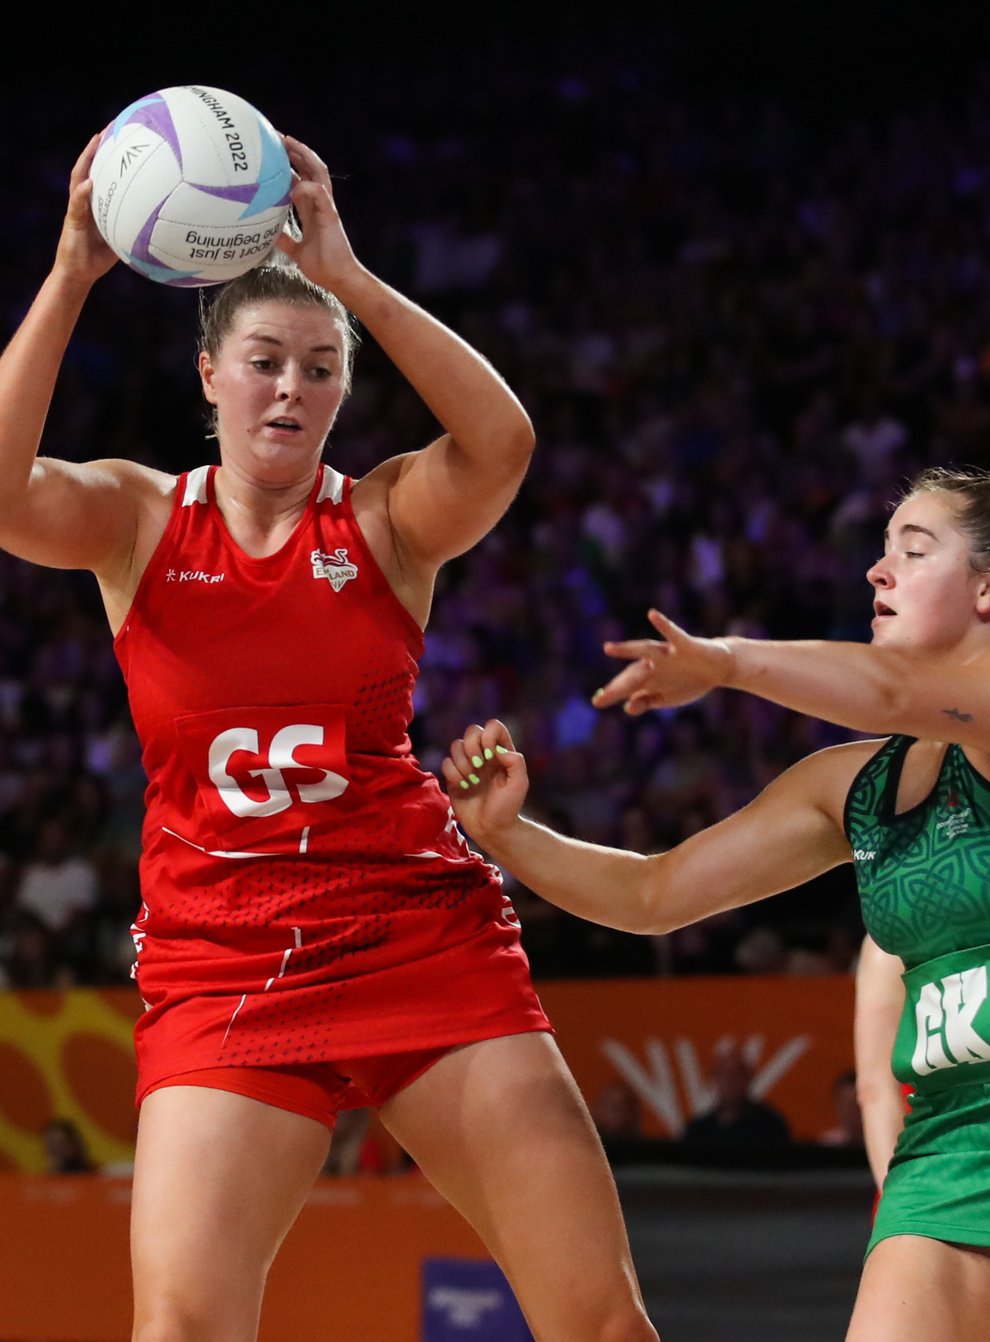 England will continue their bid to retain netball gold on a weekend where top-level women’s sport will again be in the forefront (Isaac Parkin/PA)